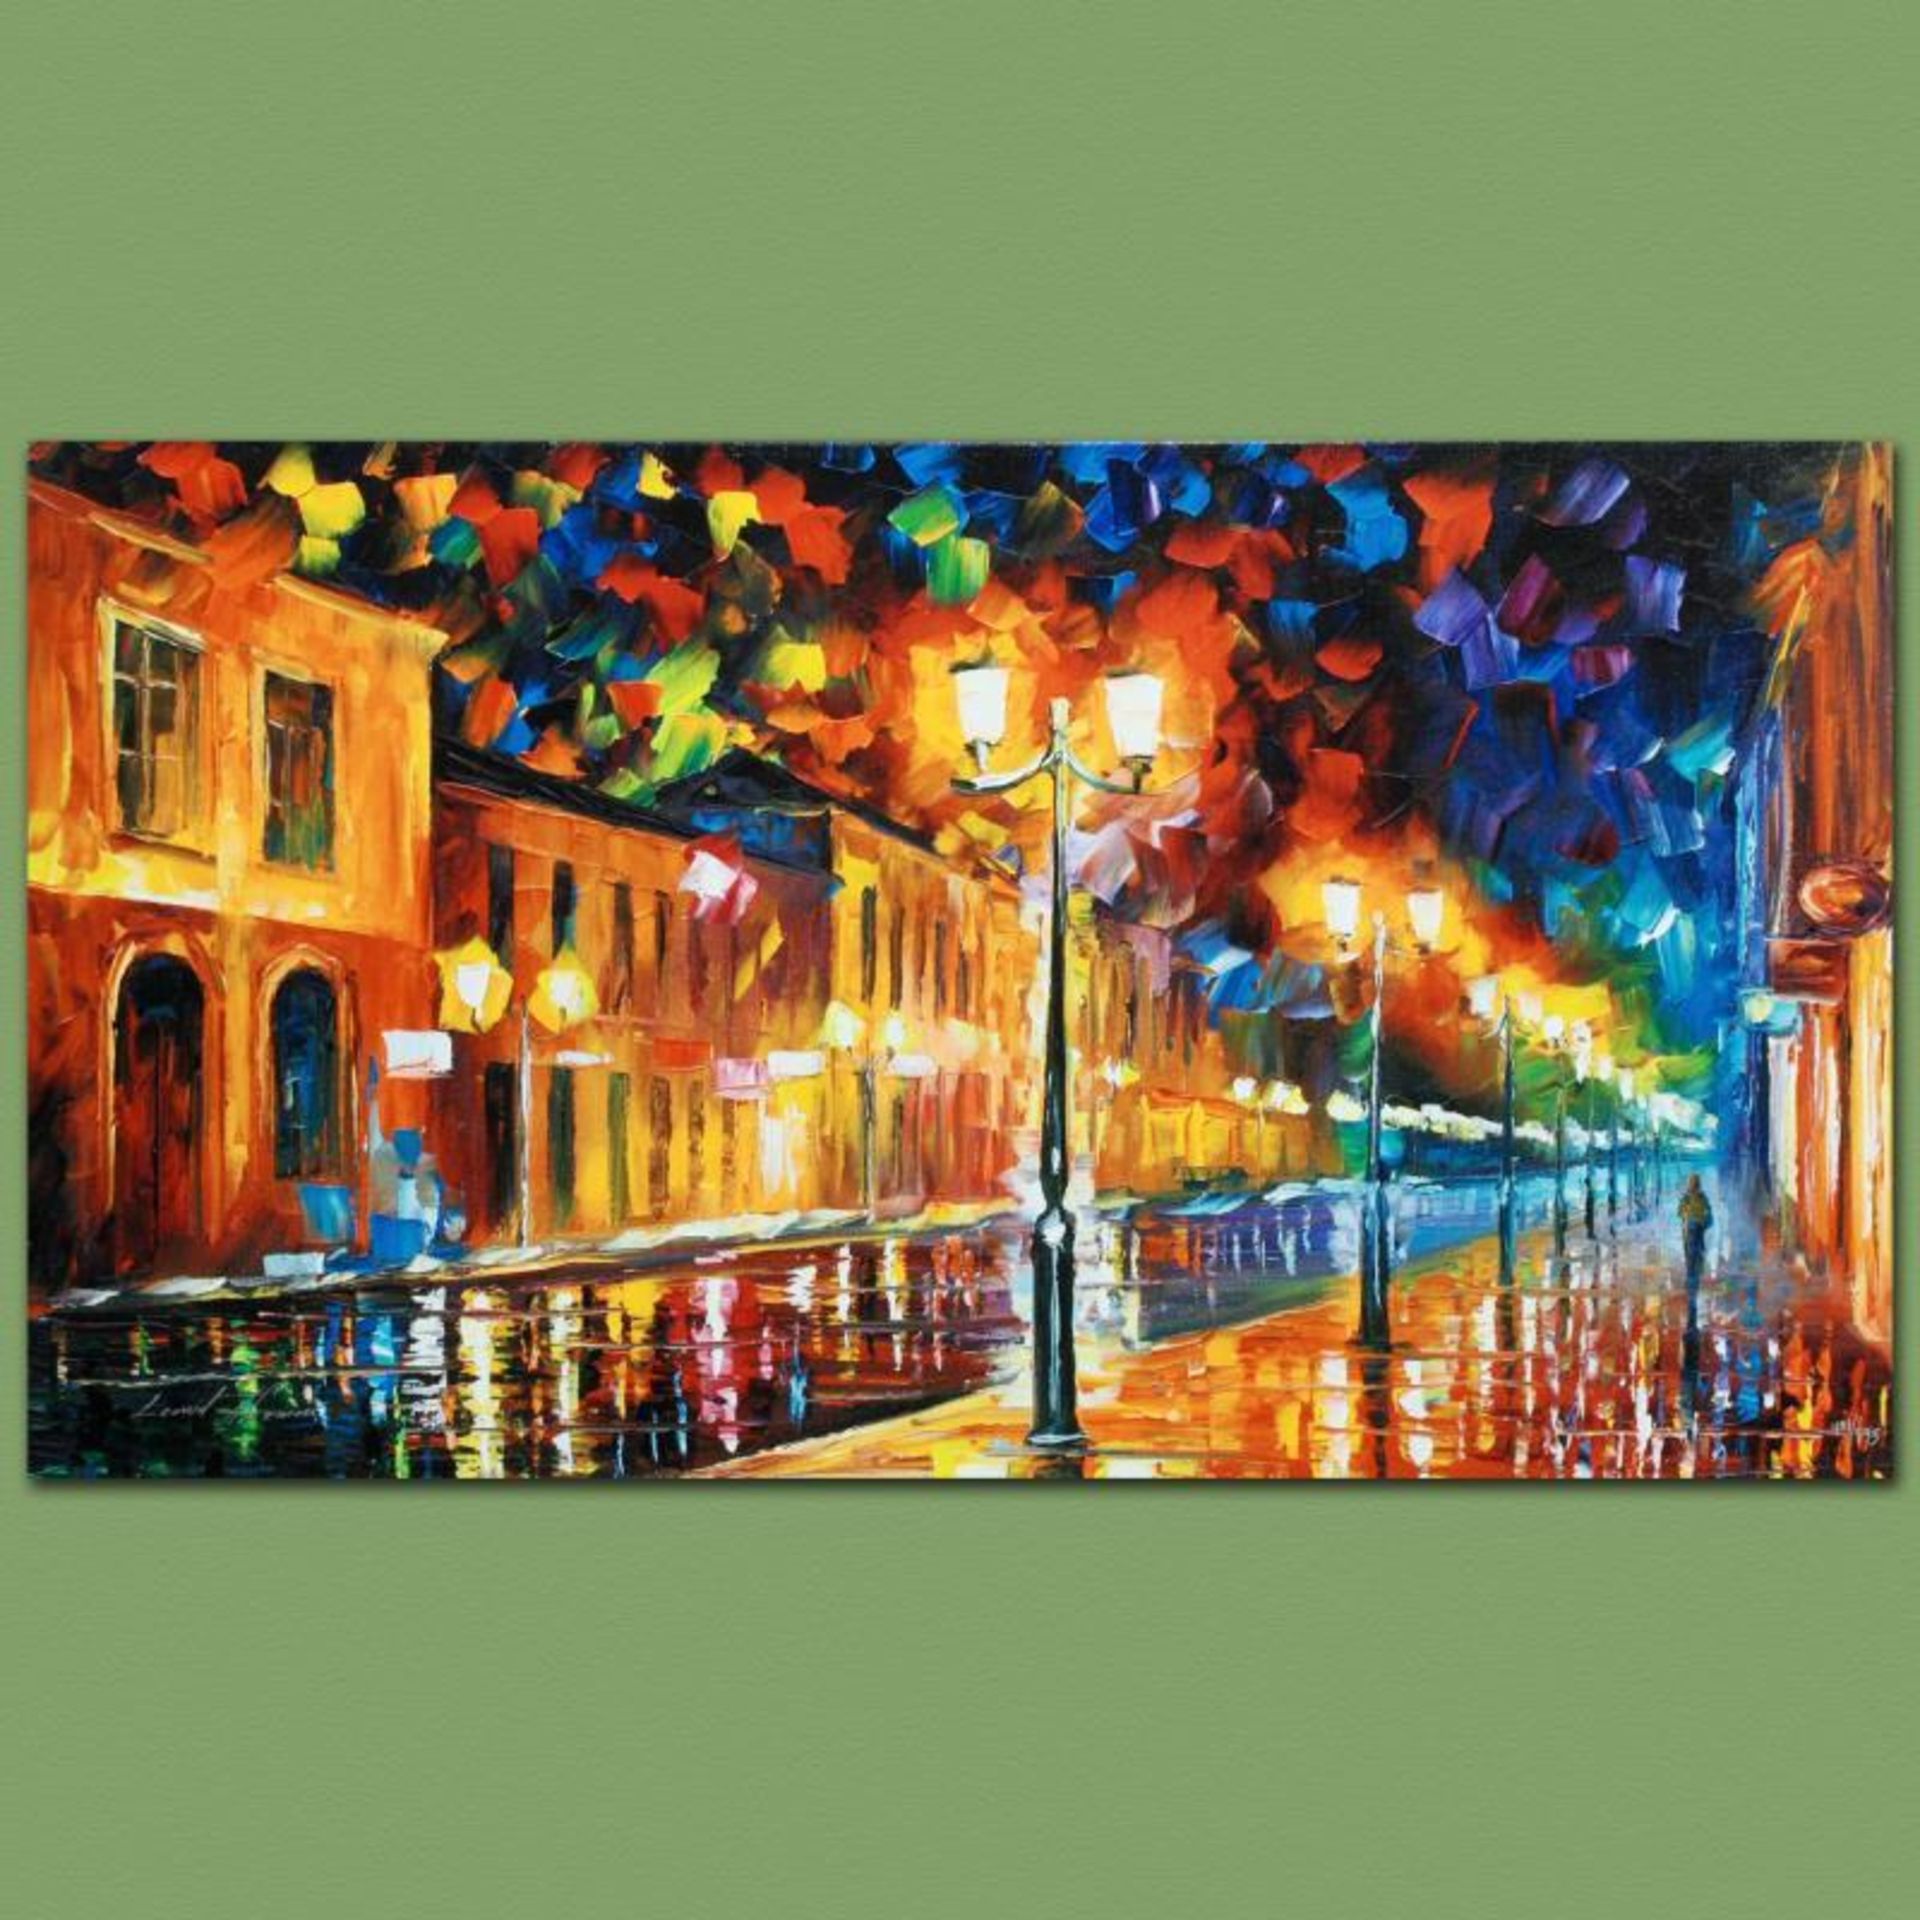 Leonid Afremov (1955-2019) "Infinity" Limited Edition Giclee on Canvas, Numbered